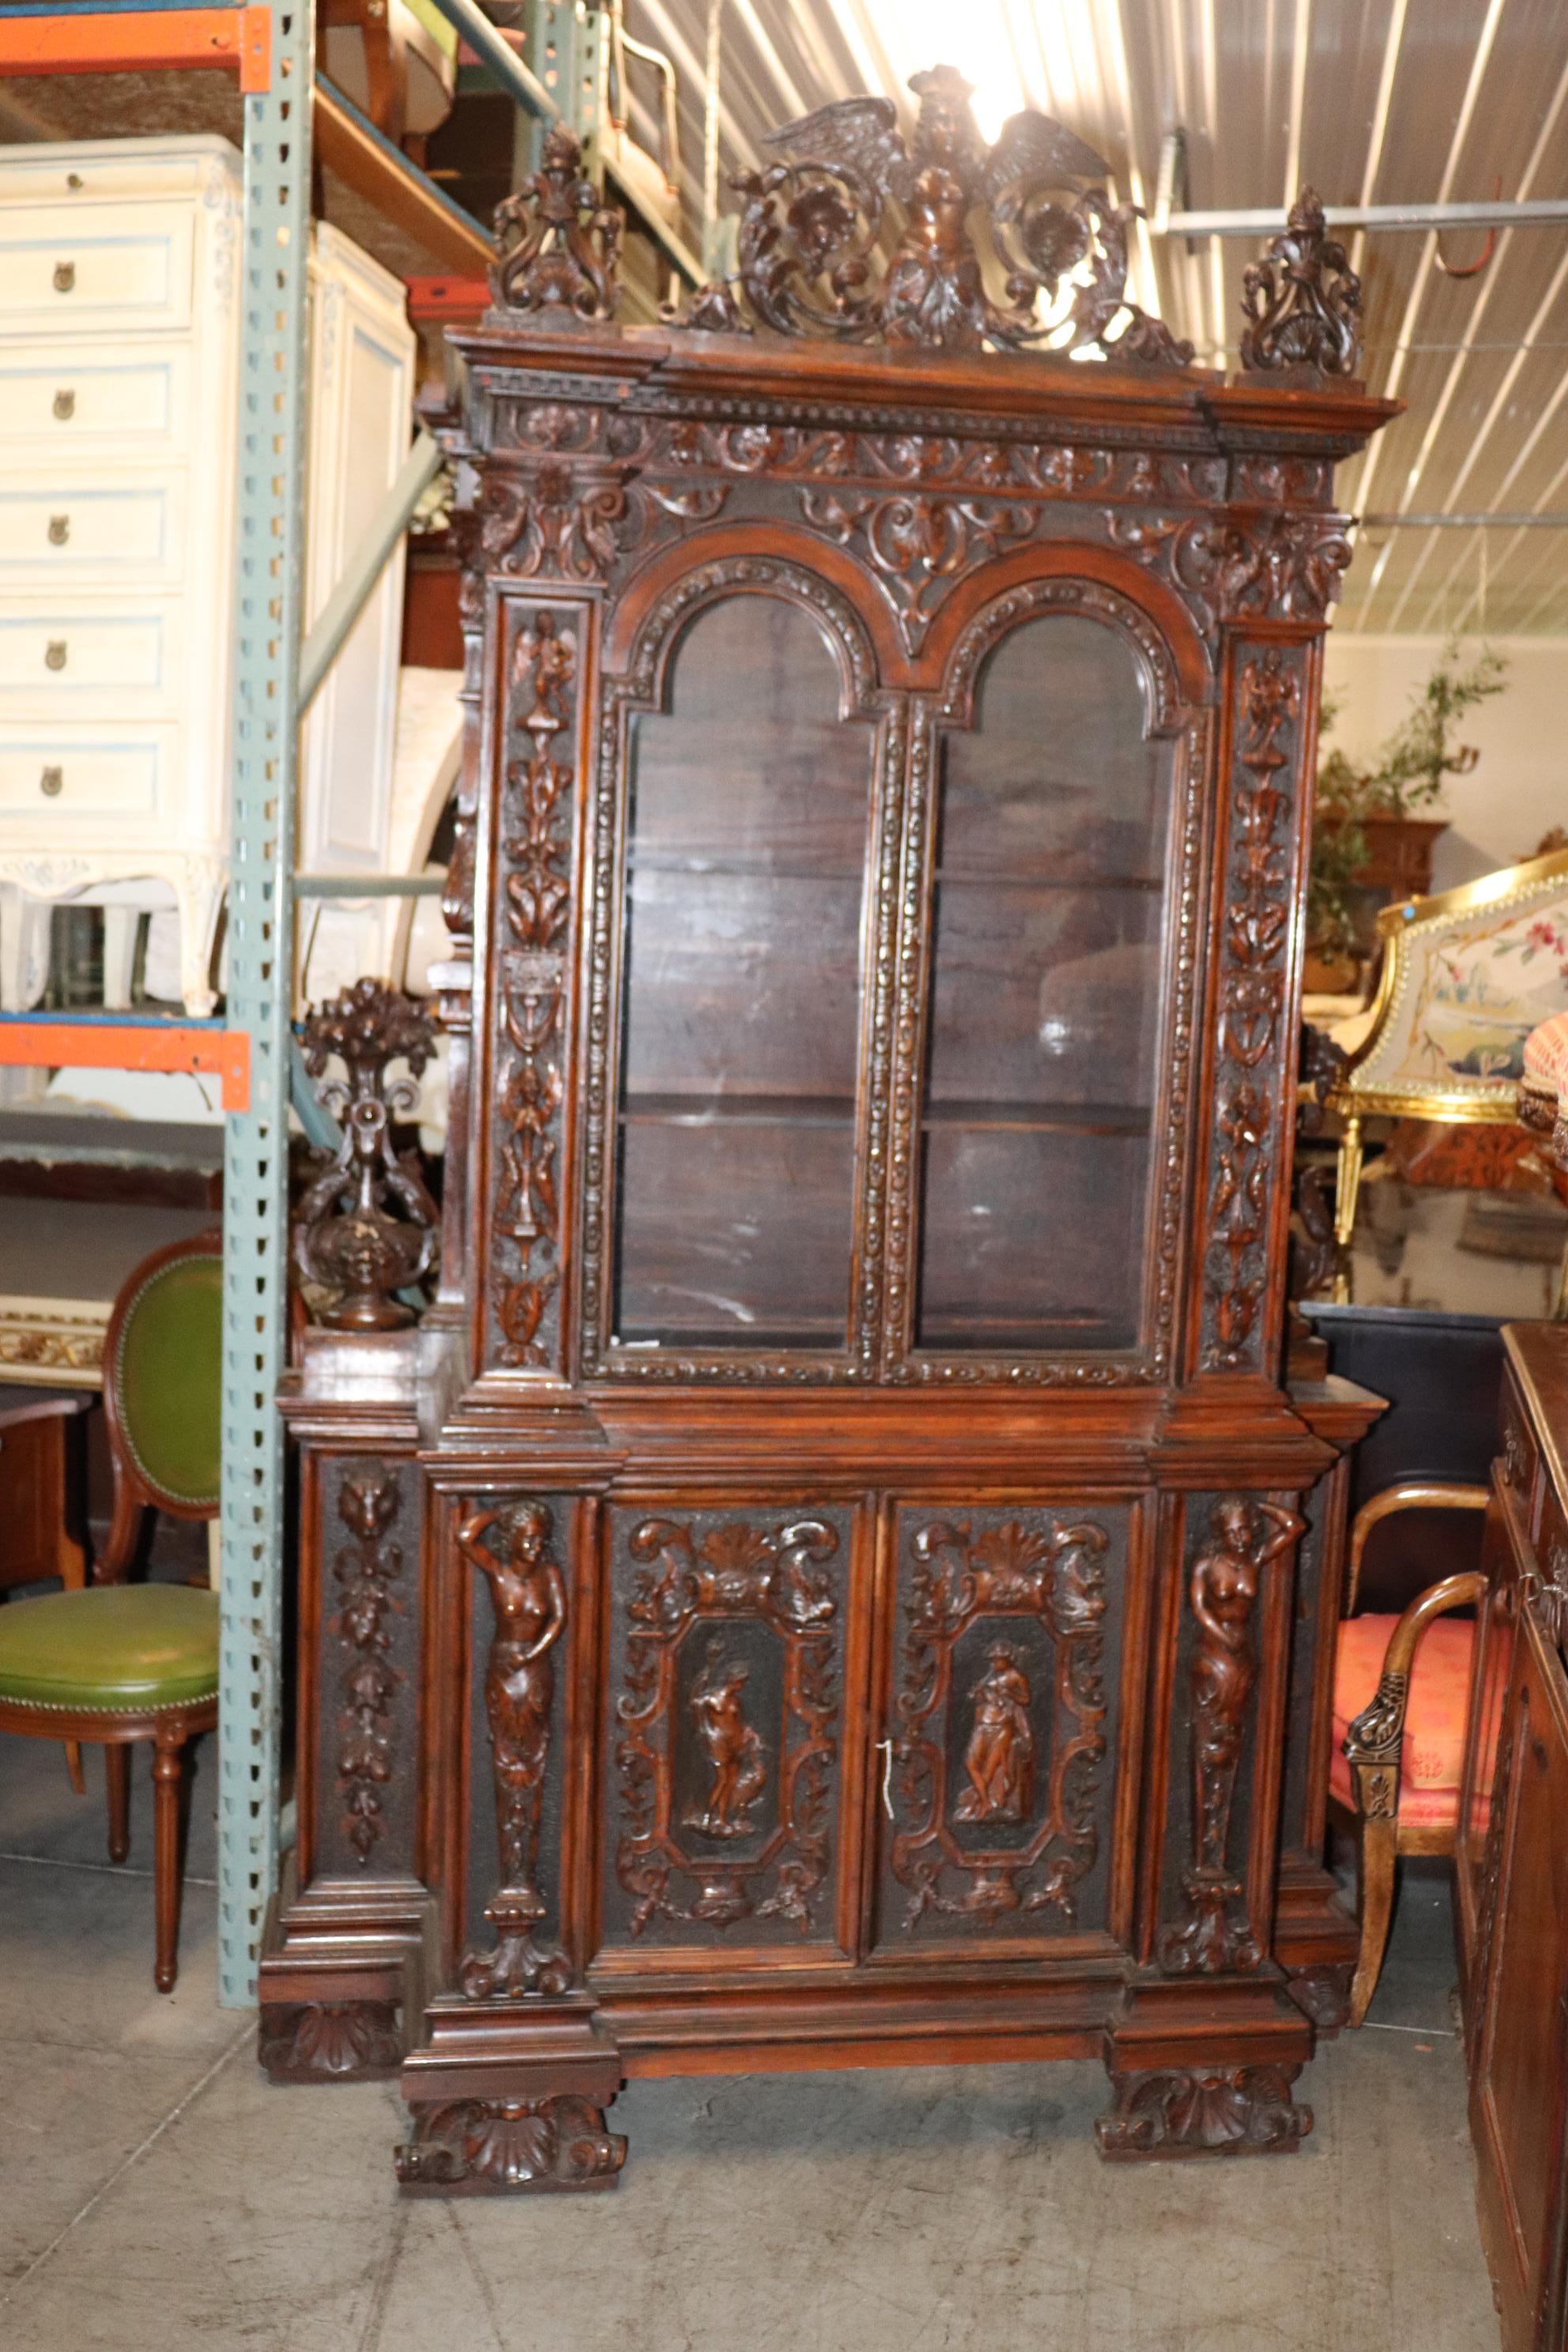 This incredible carved cabinet is an absolute masterpiece of carving and figural design. Look at the incredible quality of the carved details and the stippled areas in the background. The cabinet has hand-blown glass and has some signs of age and